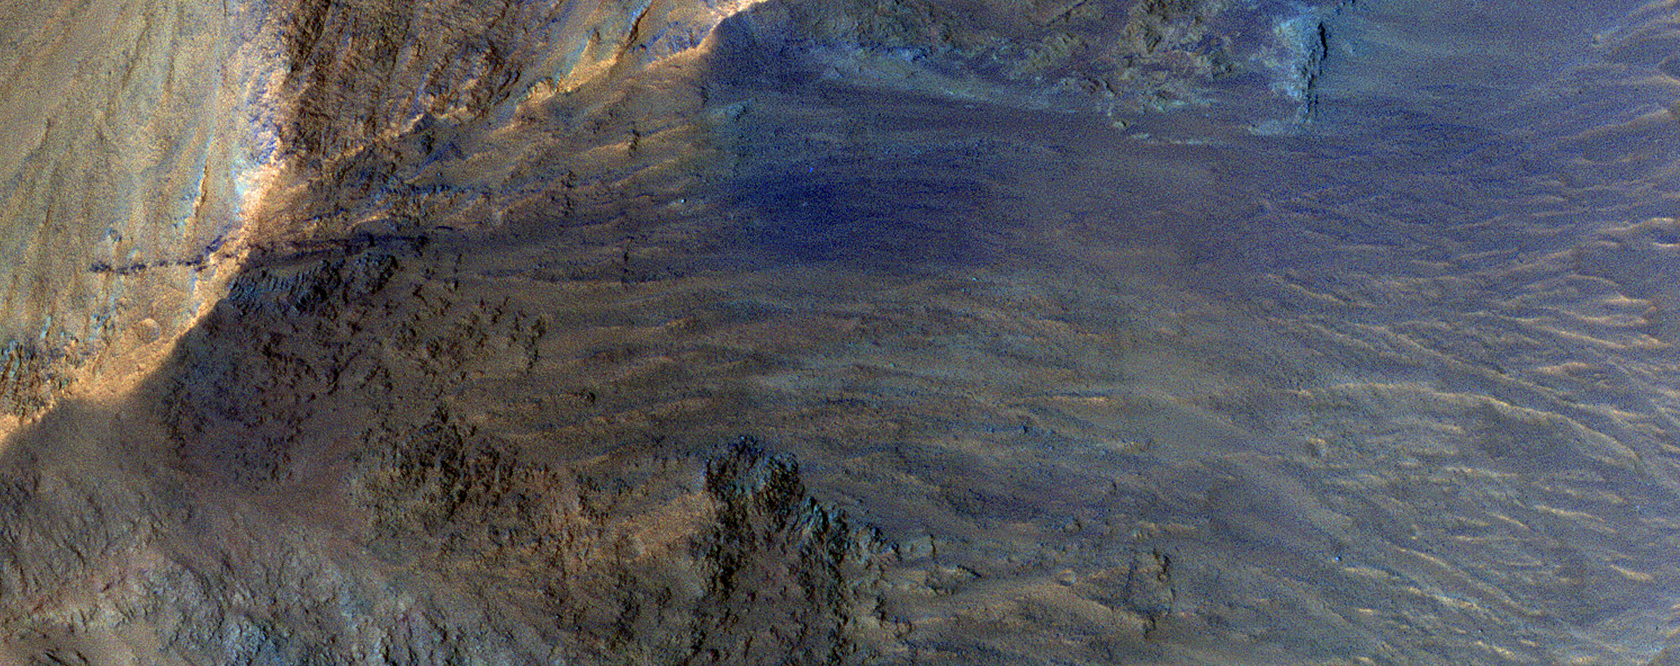 The Hills in Juventae Chasma